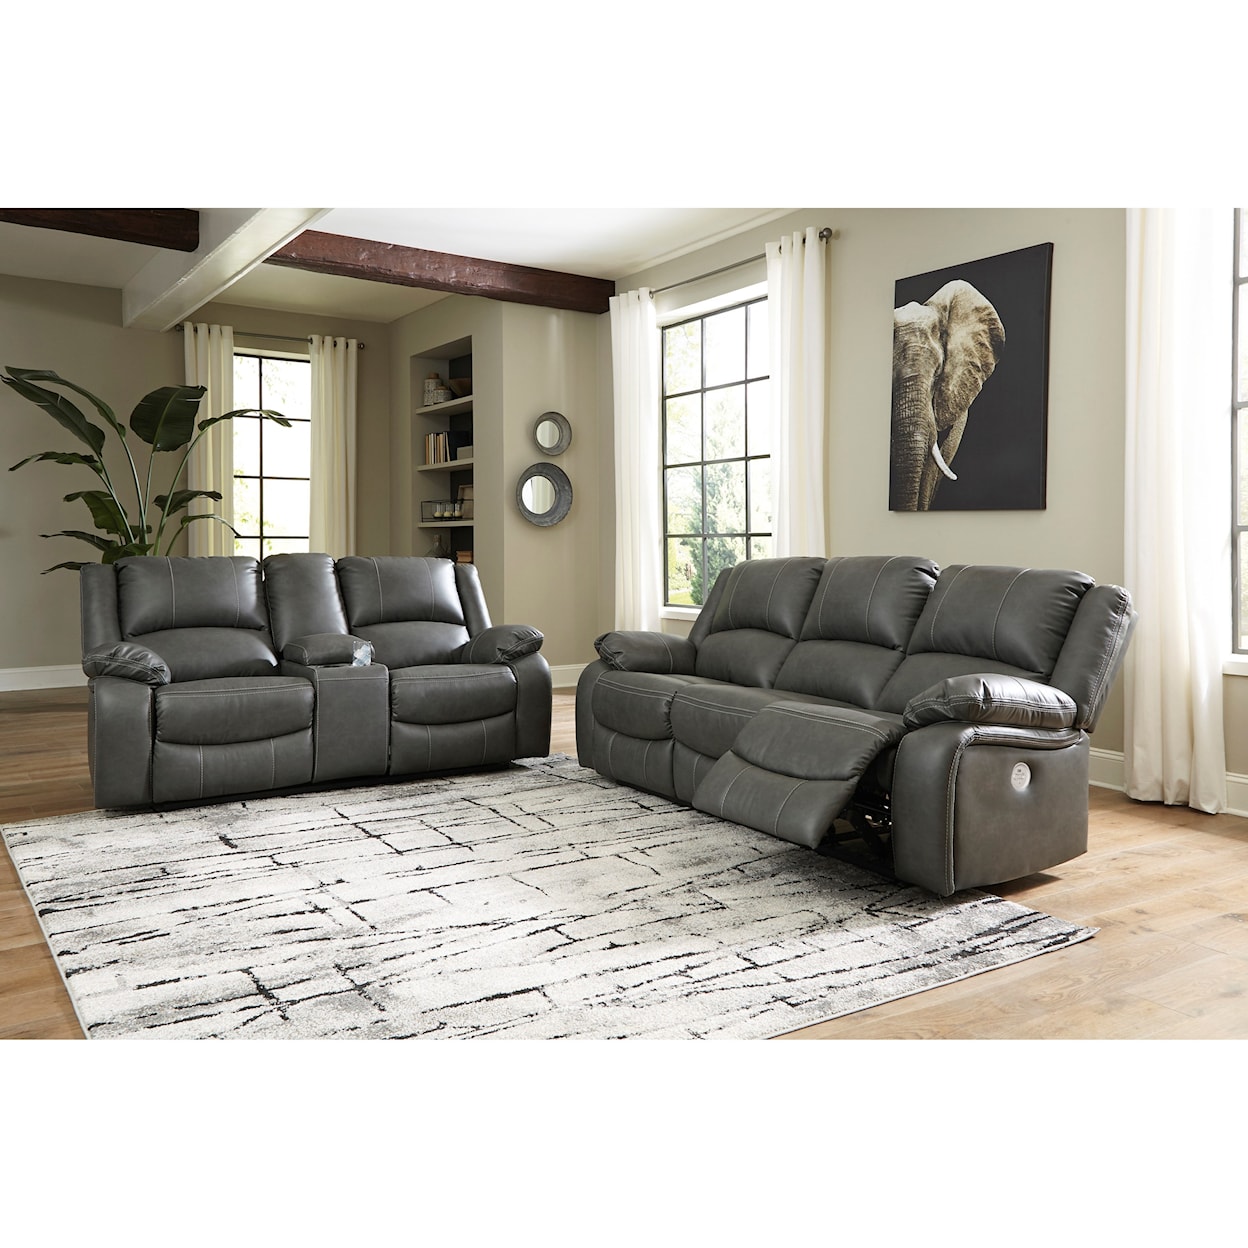 Signature Design by Ashley Calderwell Power Reclining Living Room Group